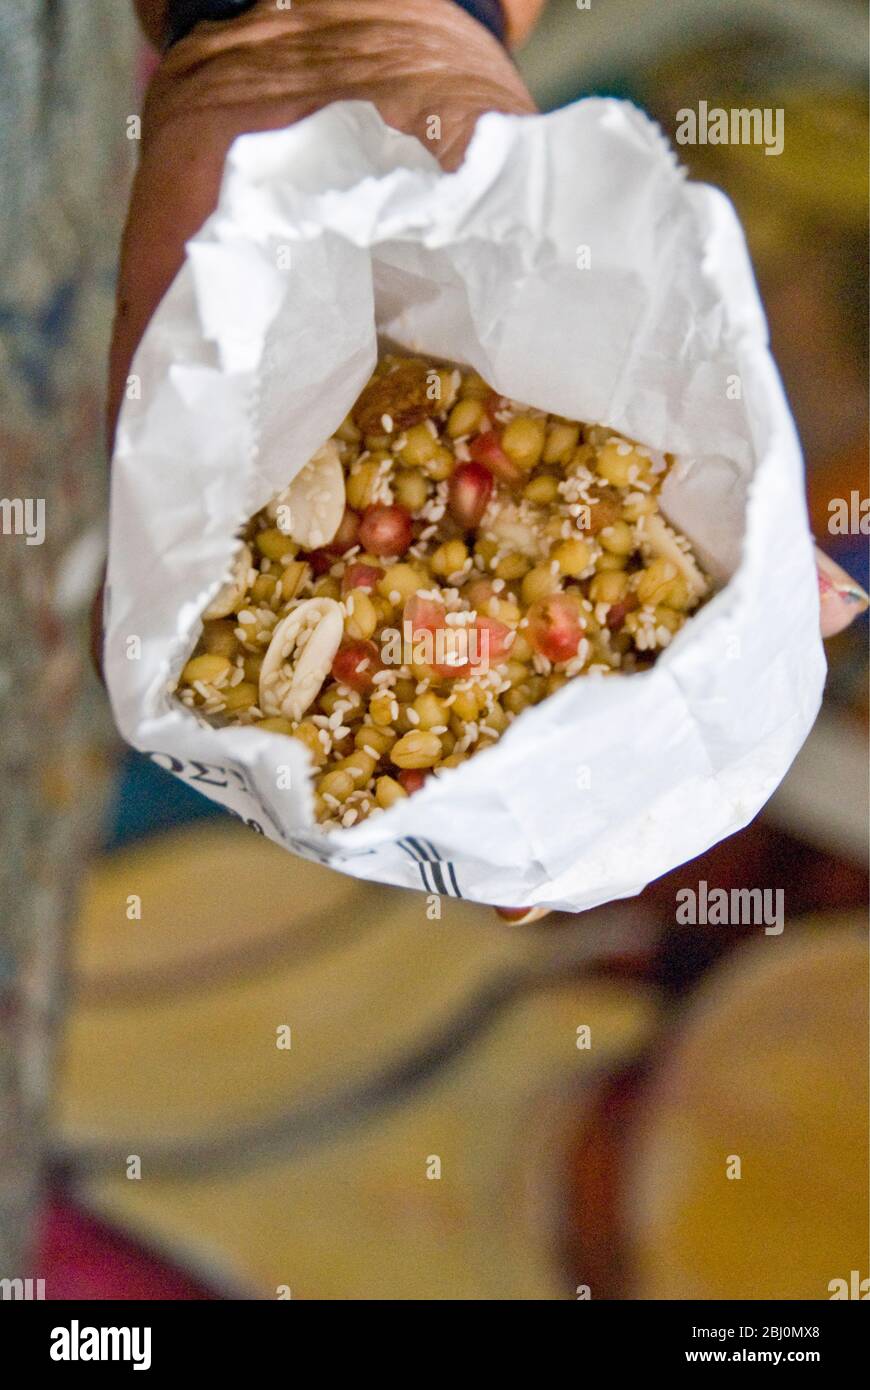 The ritual food called kollyva, consisting of boiled wheat, pomegranate seeds, almonds, sesame, and raisins, which is taken to church for funerals, me Stock Photo